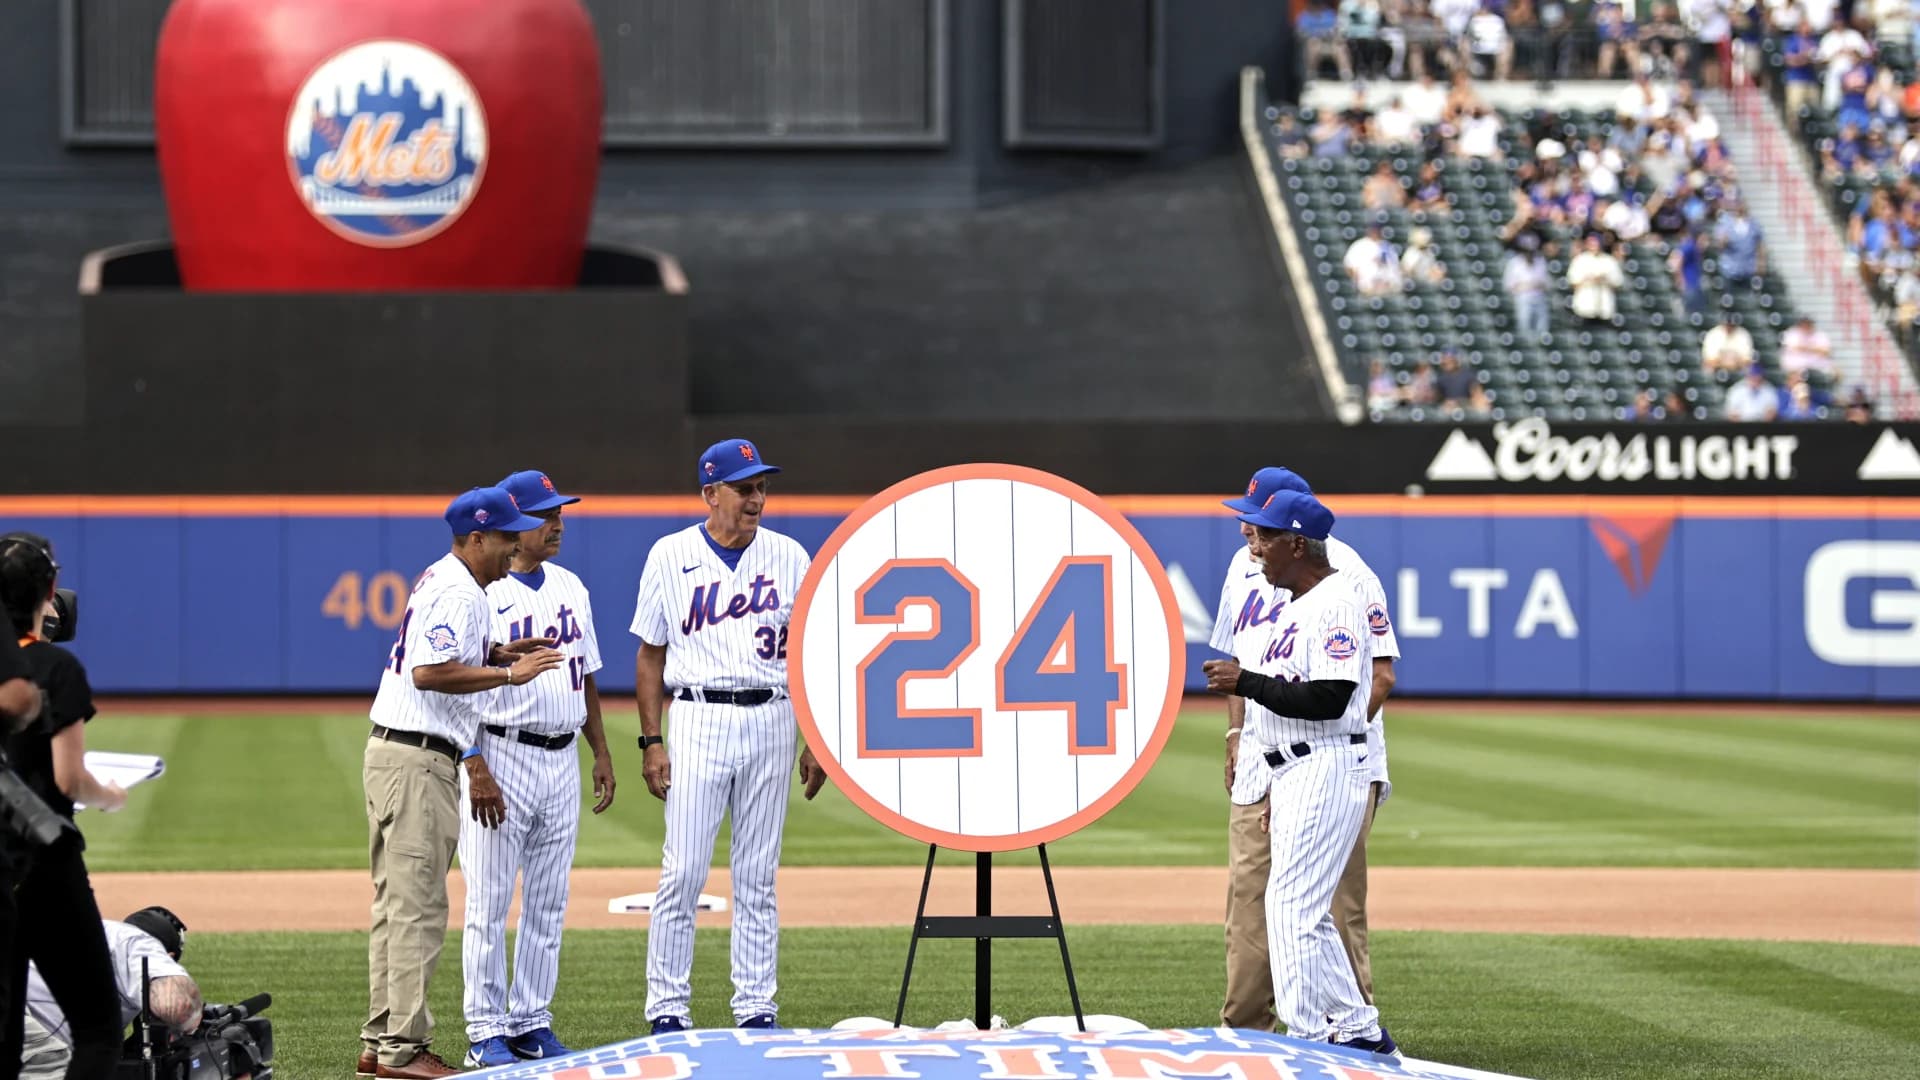 Mets honor legend Willie Mays by retiring his number 24